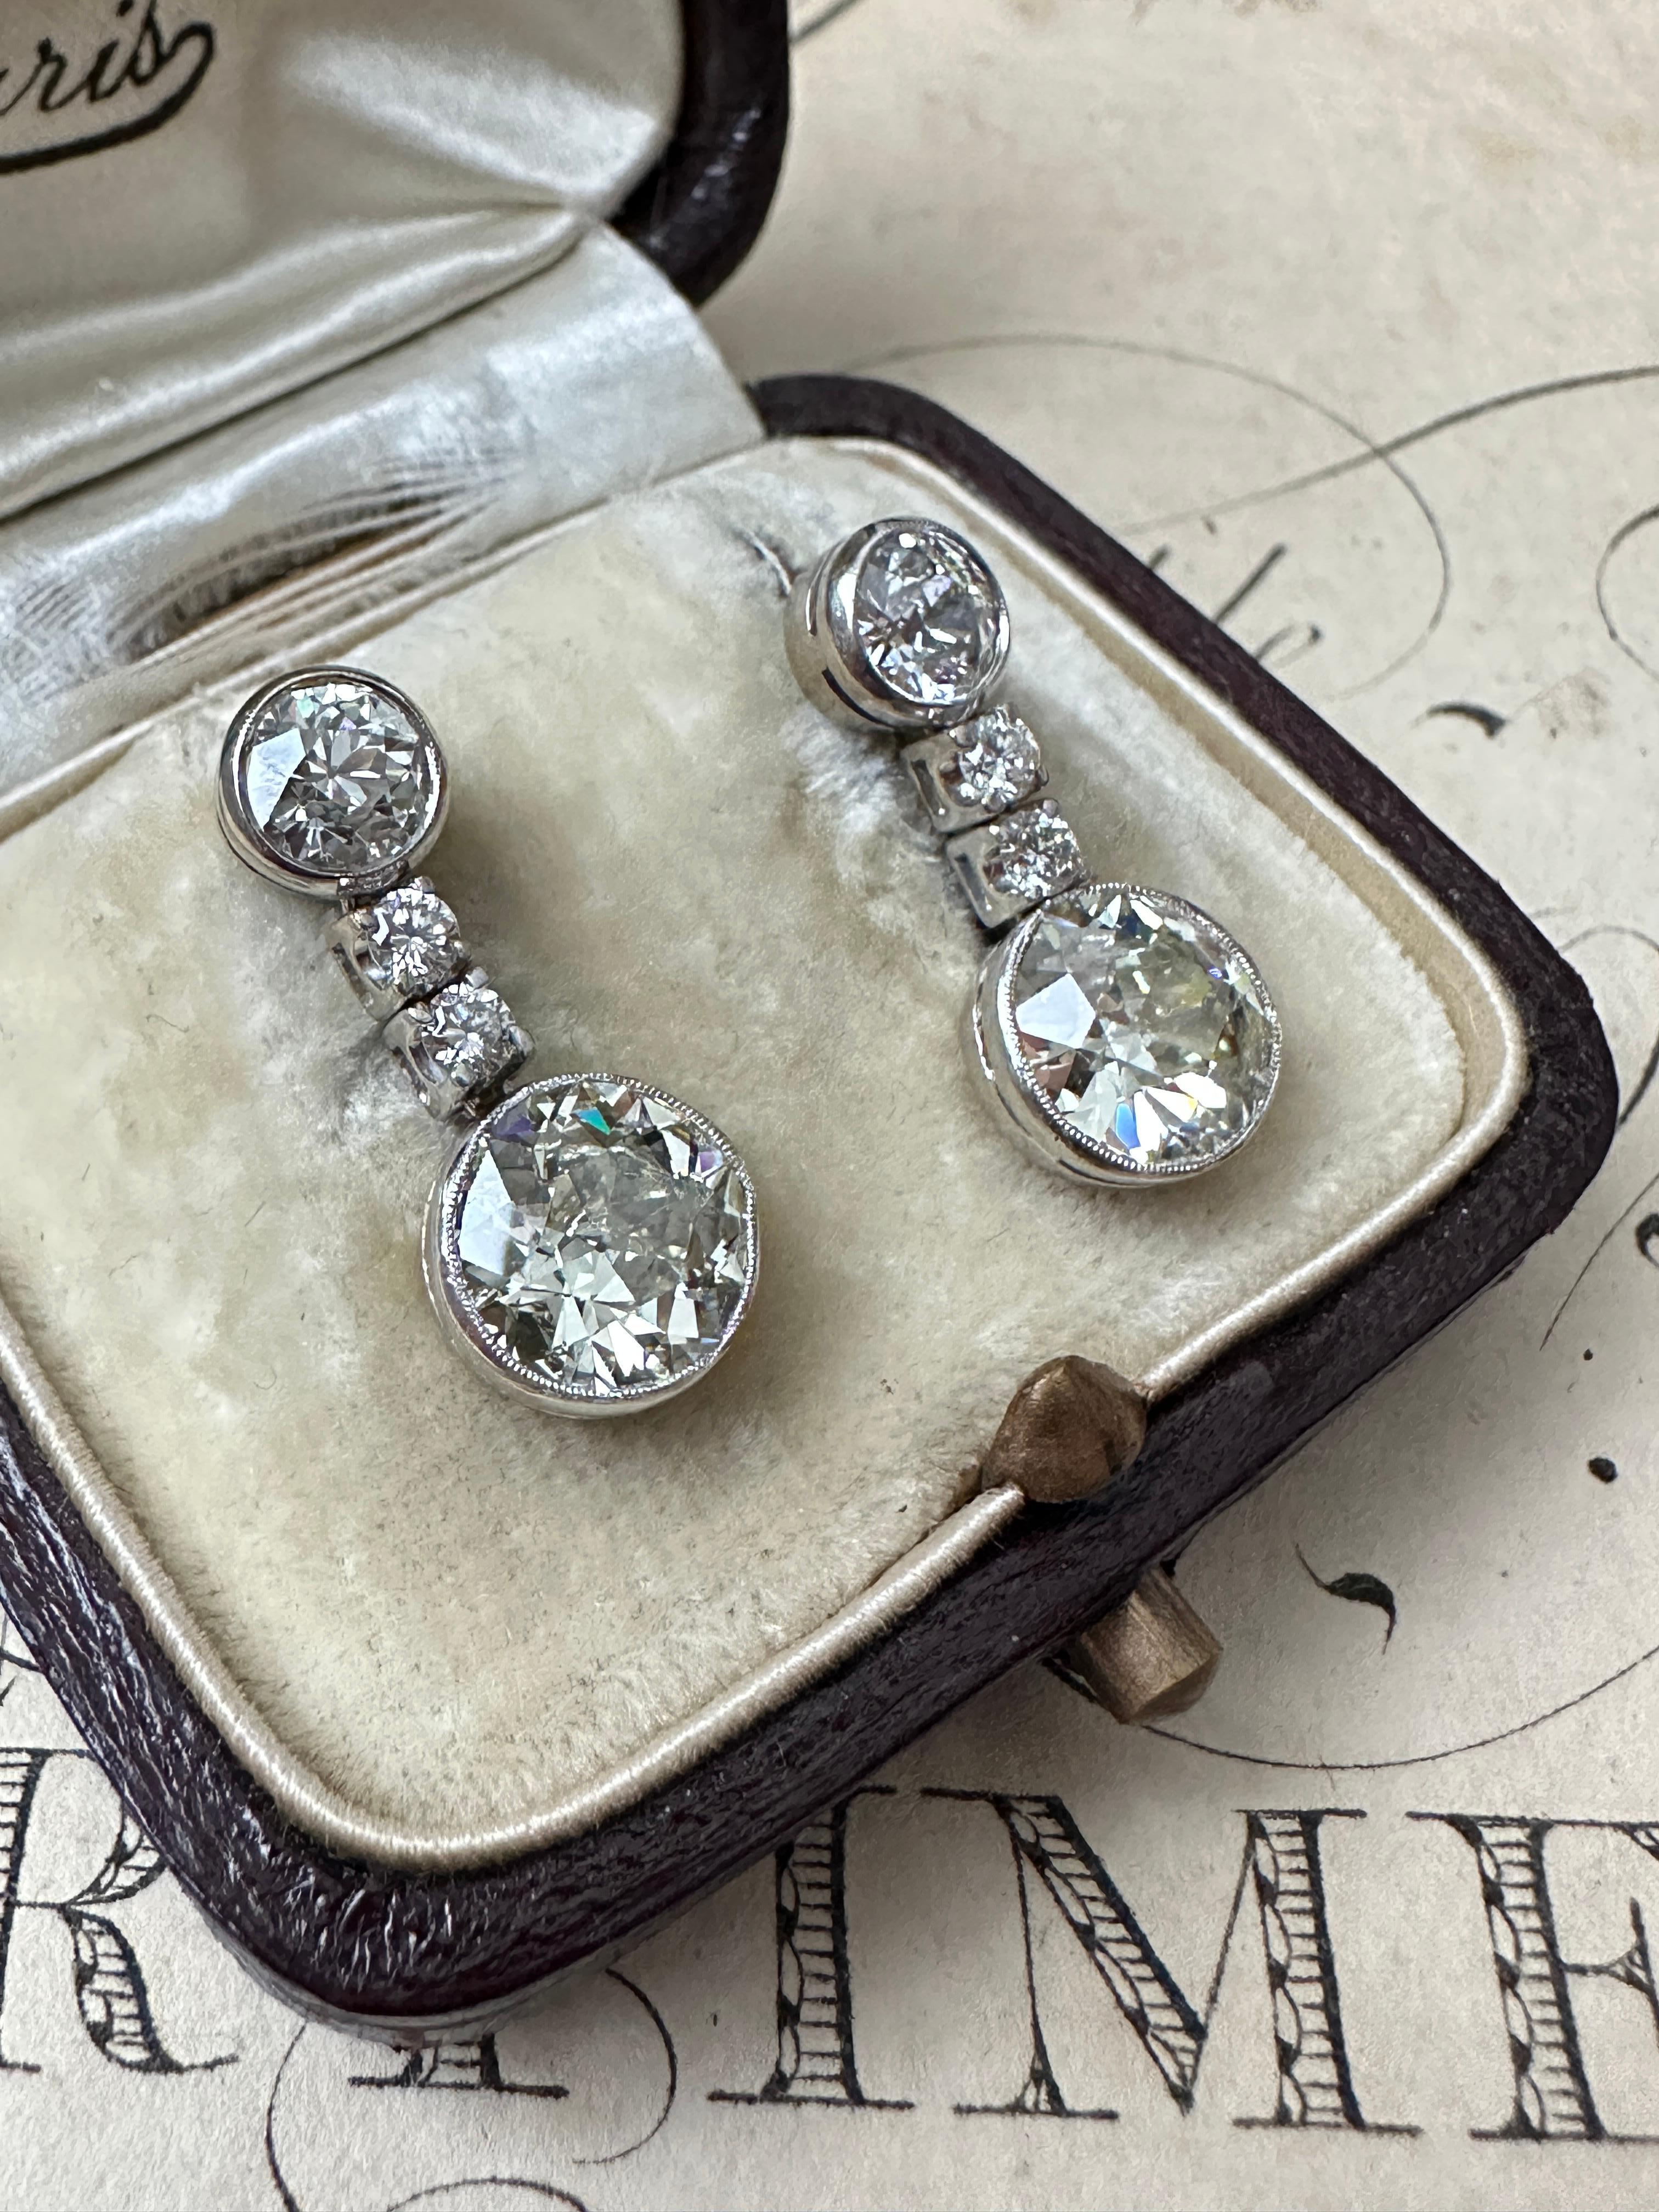 Art Deco Diamond Drop Earrings - GIA - 4.67 total carats In Good Condition For Sale In Hummelstown, PA